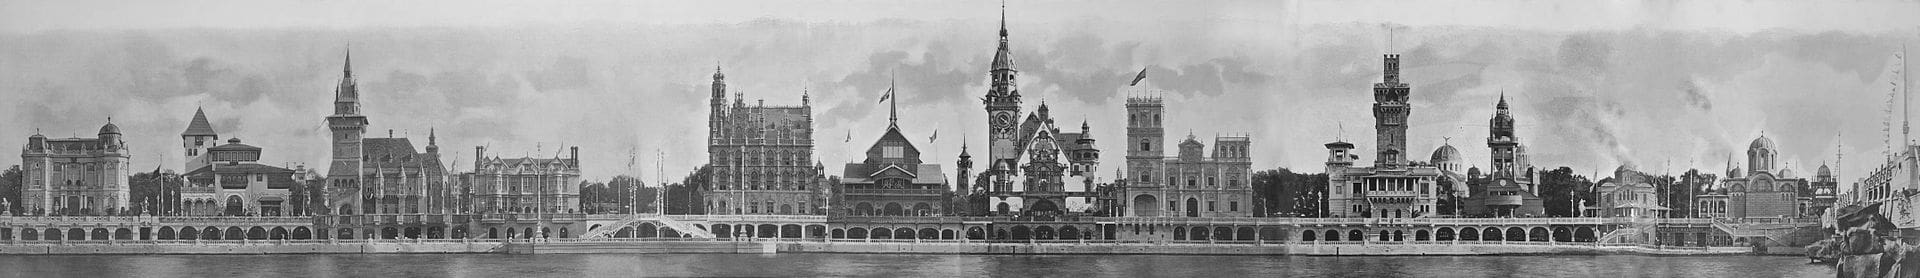 Panorama of foreign pavilions at the 1900 Paris World Fair